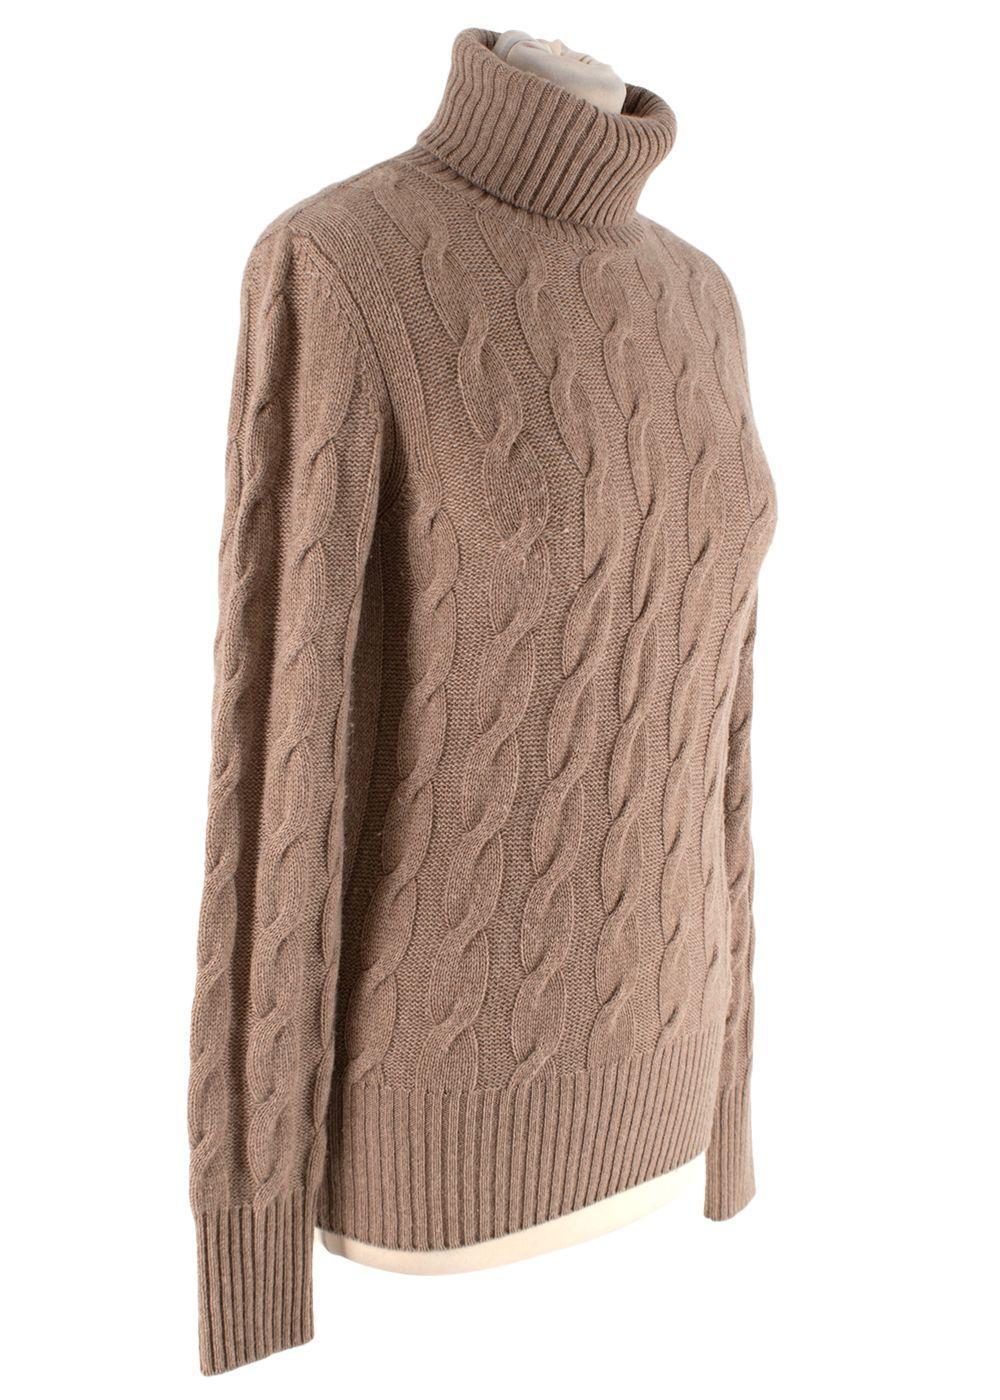 Loro Piana Light Brown Cable Knit Baby Cashmere Sweater

- Soft and sumptuous baby cashmere with subtle cable knit weave
- Ribbed polo neck, cuffs, and hemline
- Slim fit

Materials:
100% Cashmere

Made in Italy
Machine wash 30 degrees only

9.5